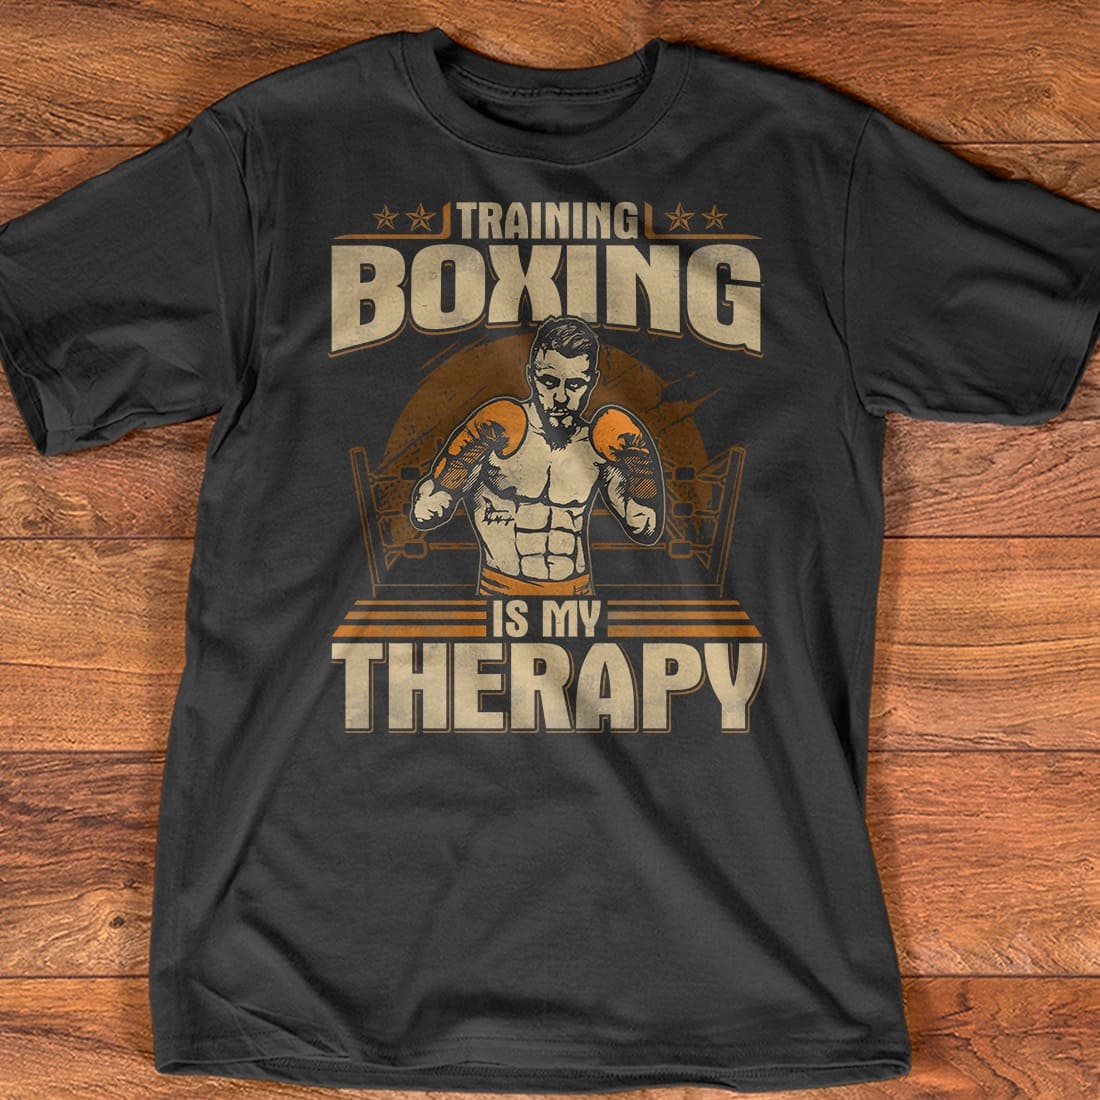 Training boxing is my therapy - Strong boxing man, gift for boxing players